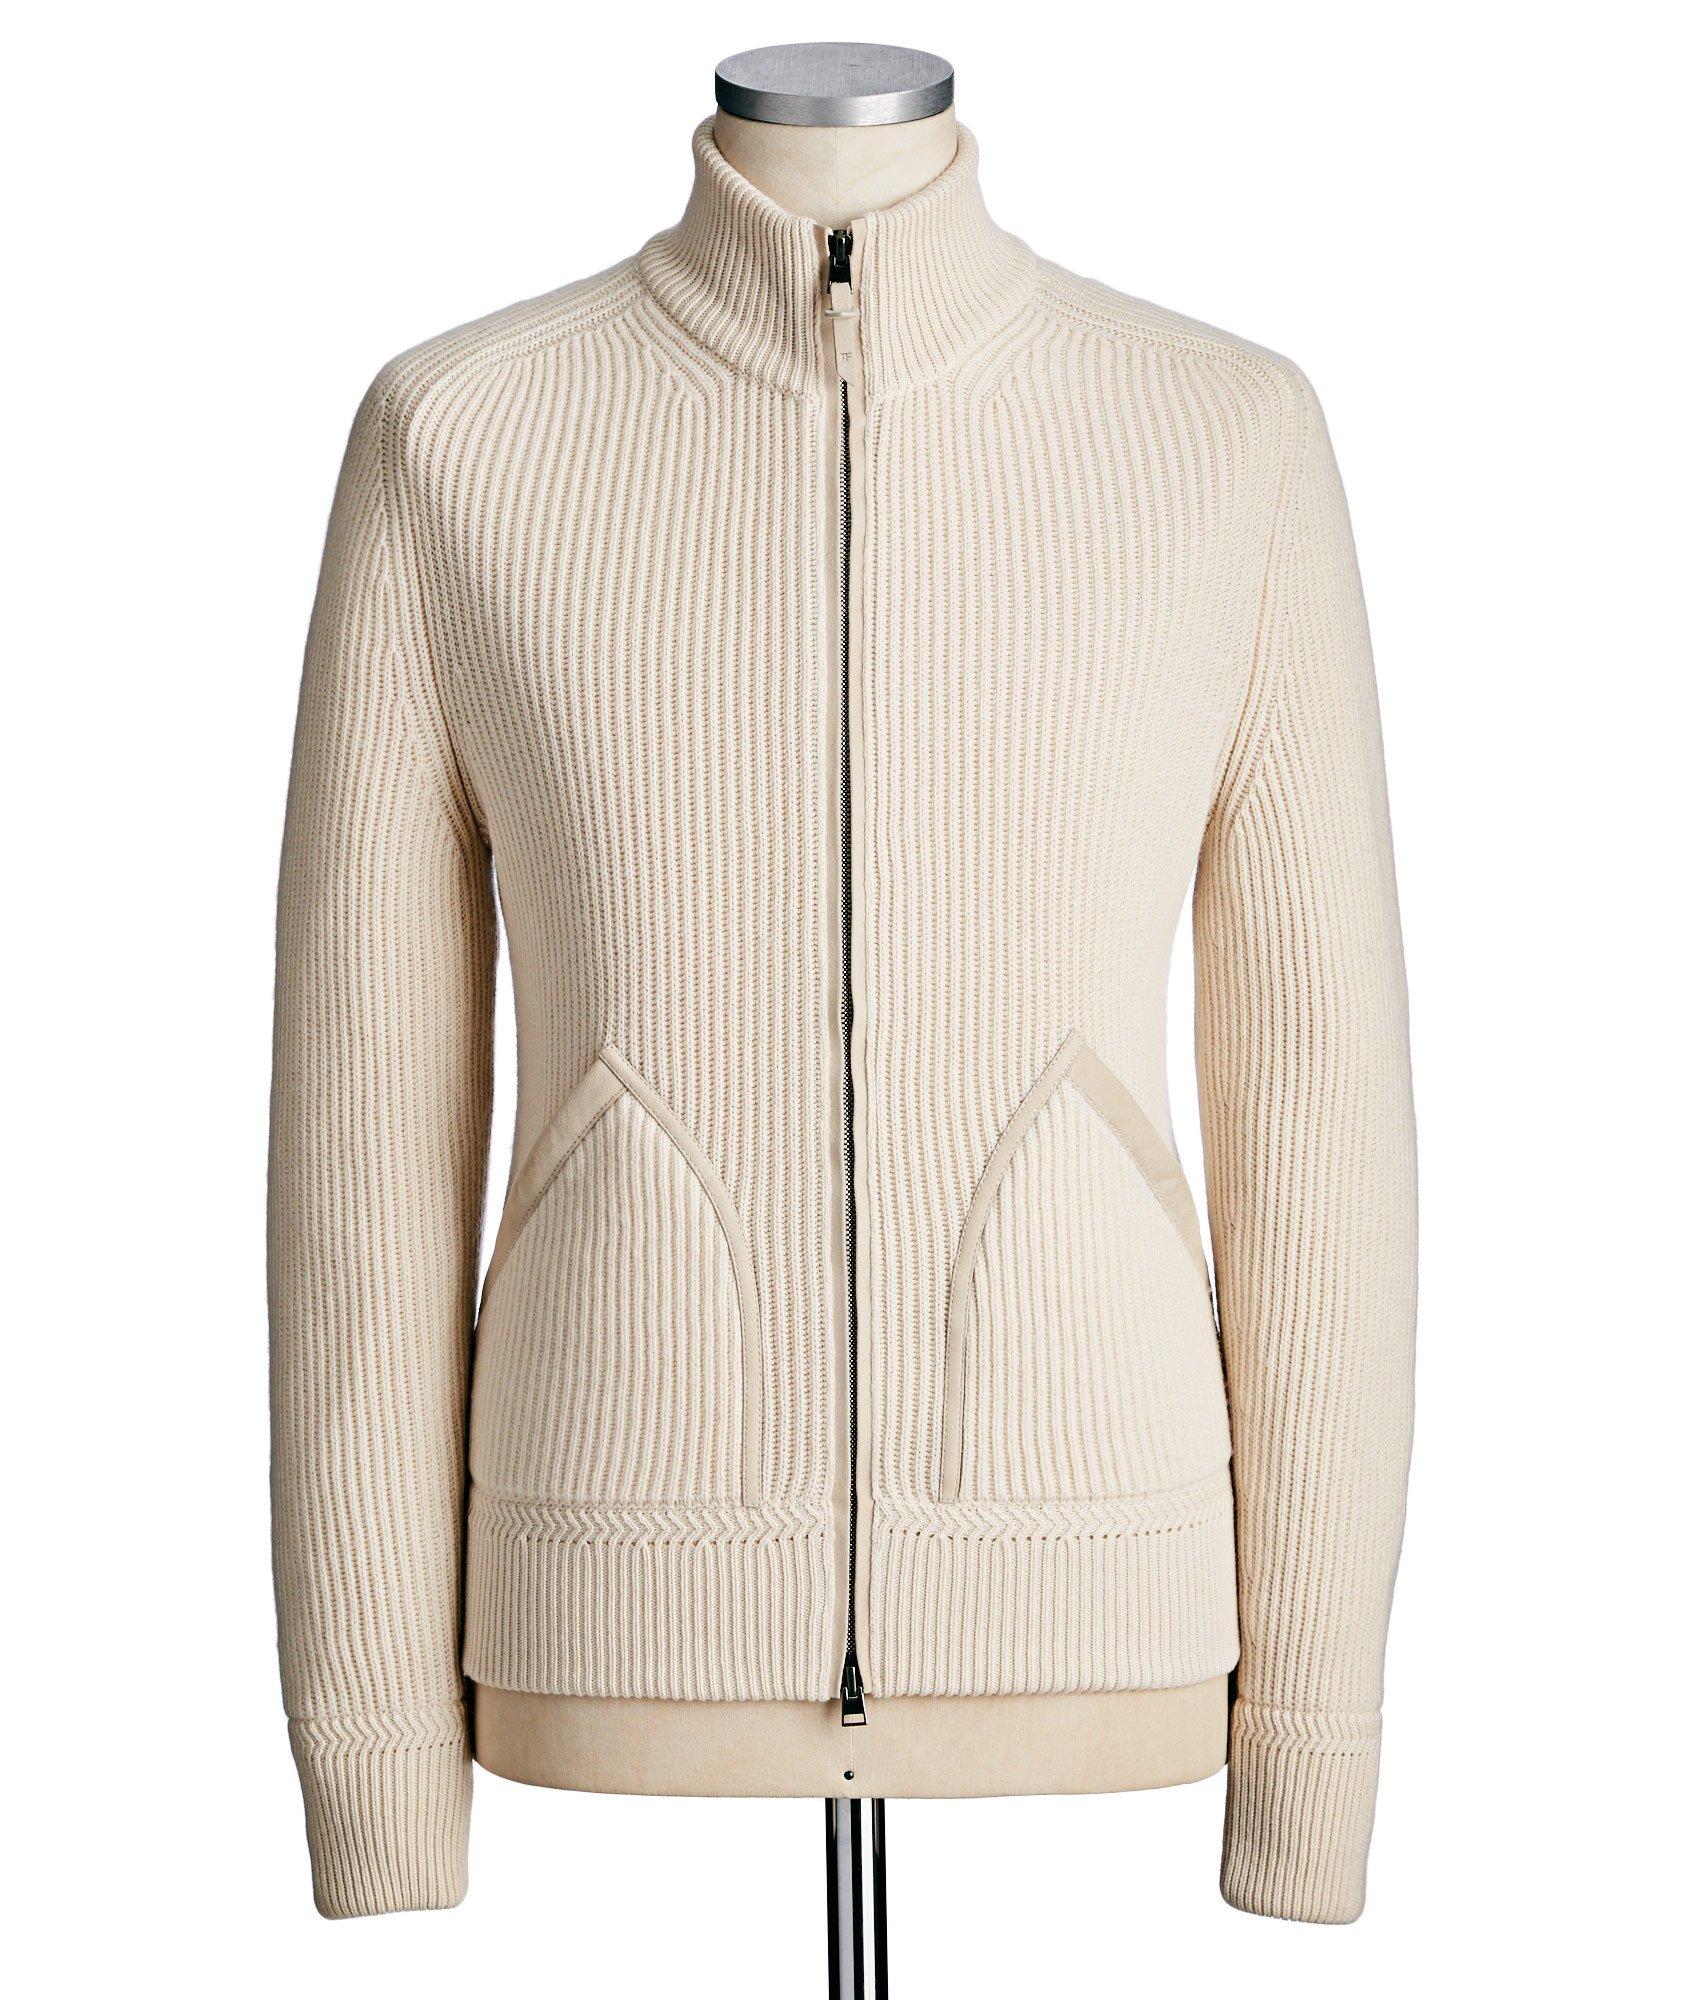 Cashmere Zip-Up Sweater image 0